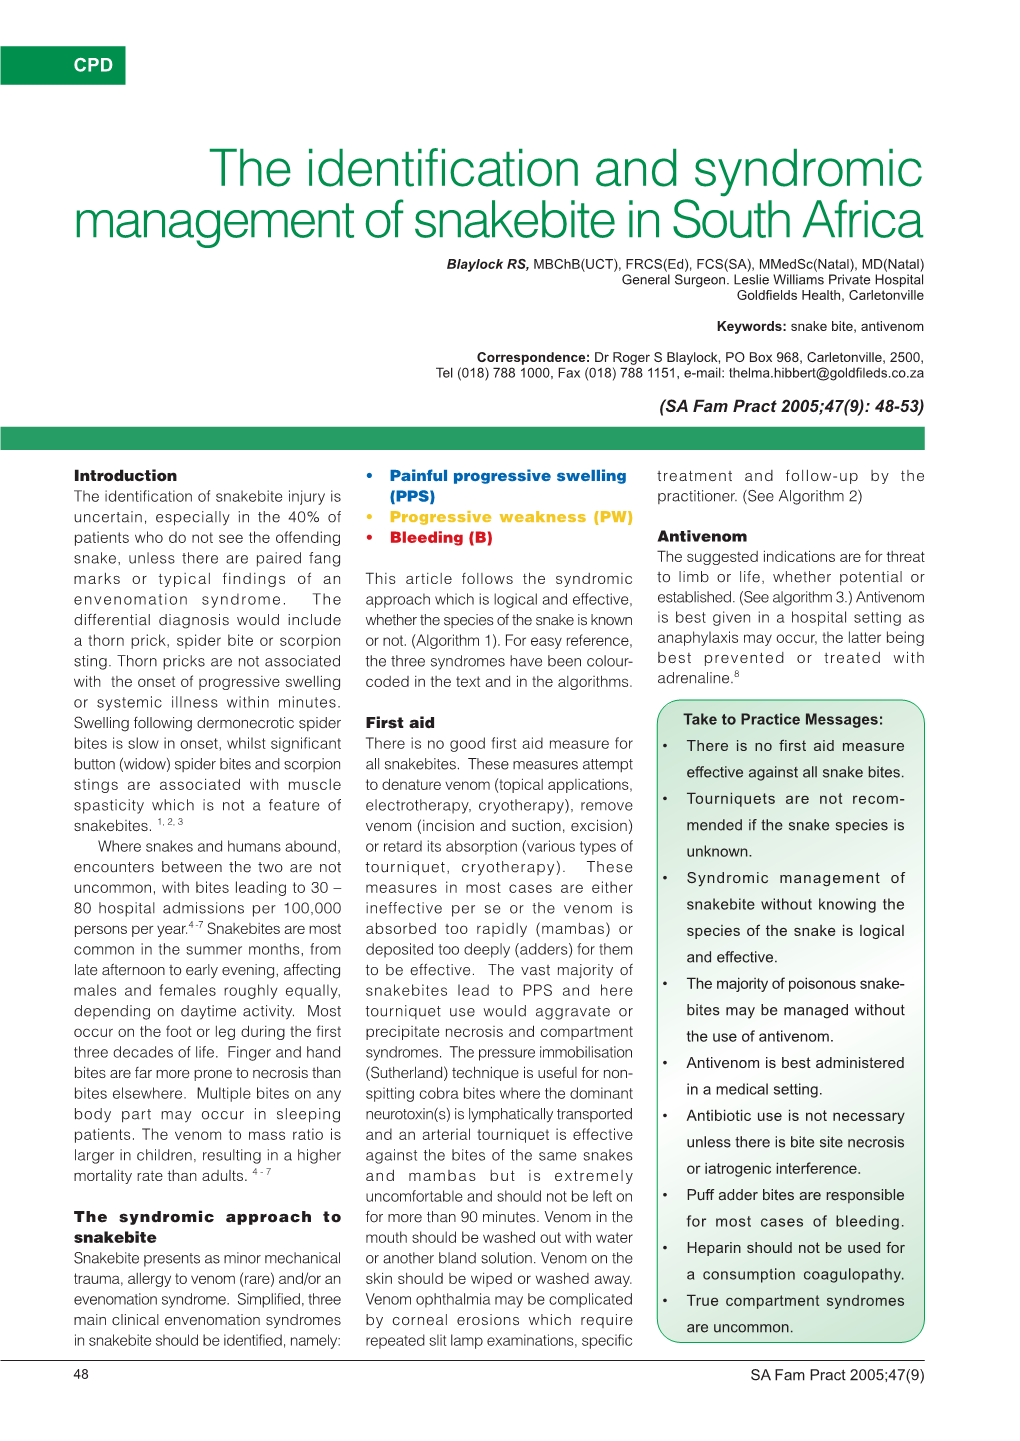 The Identification and Syndromic Management of Snakebite in South Africa Blaylock RS, Mbchb(UCT), FRCS(Ed), FCS(SA), Mmedsc(Natal), MD(Natal) General Surgeon